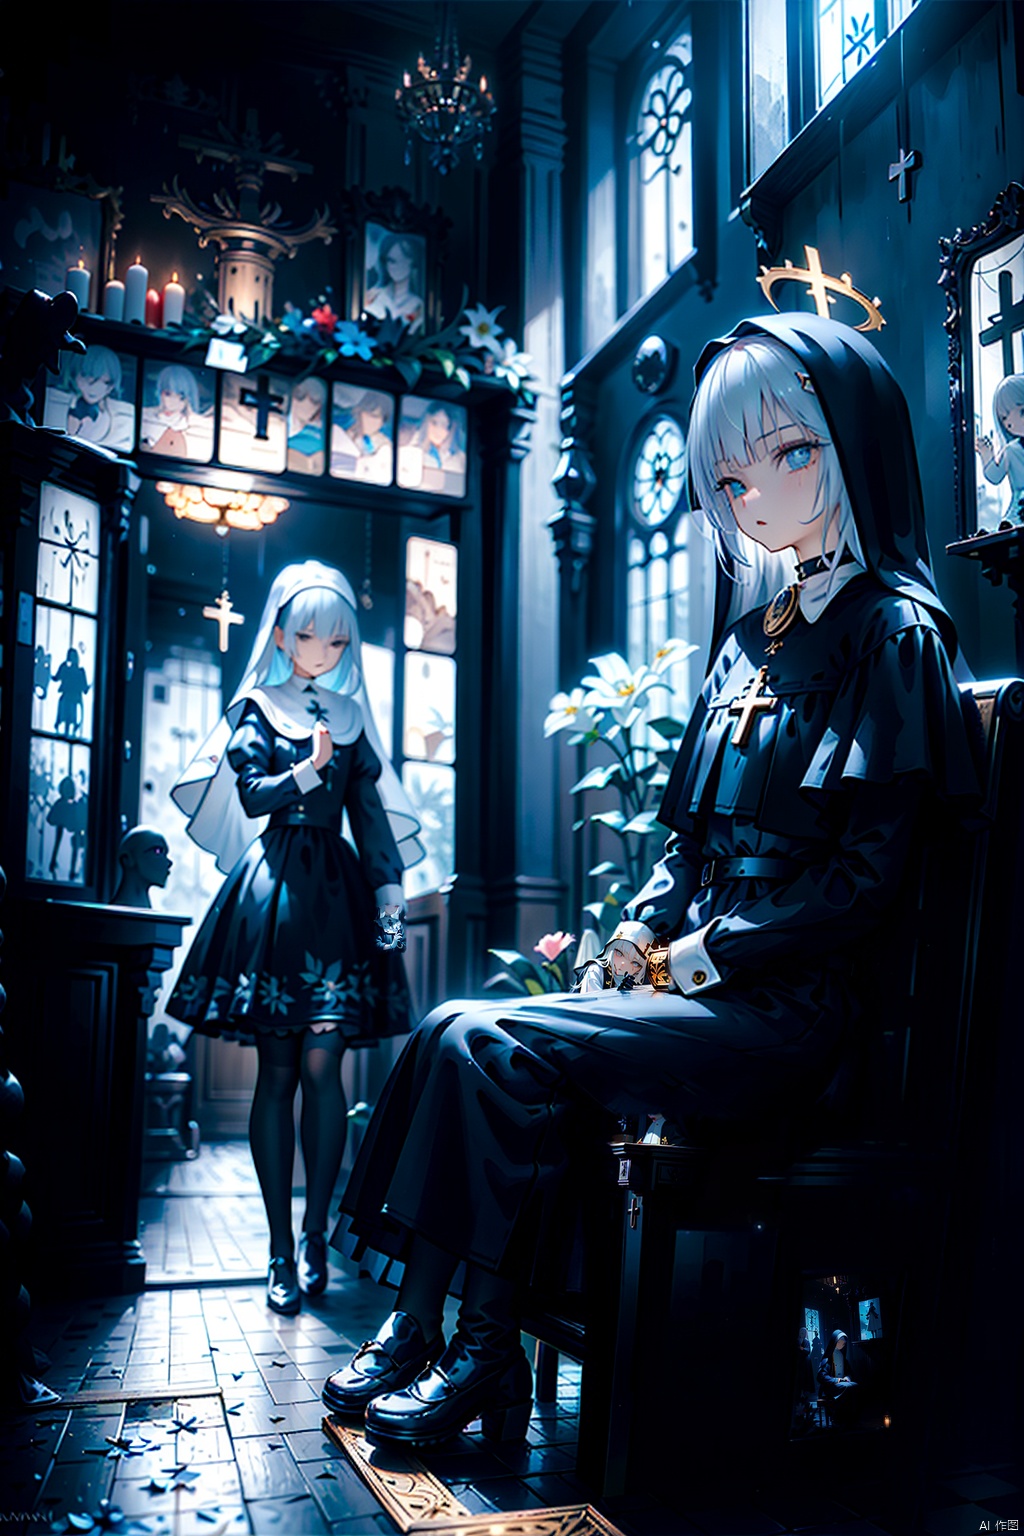  masterpiece,best quality,UHD,impossible clothes,****_female, white hair,nun,church bell,pew,church,dark aura,dark room,black sclera,statue,praying,serious,expressionless,expressionless,slit pupils,devil pupils,black gloves,boots,one knee,f/2.8,stained glass,cryptid,no humans,fog,character signature,character watermark,gold gloves,black collar,cross choker,greek cross,crucifix,side mirror,background text, nai3, Glass flower room, midjourney, BY MOONCRYPTOWOW,HALO, Tight latex clothing, ghostdom